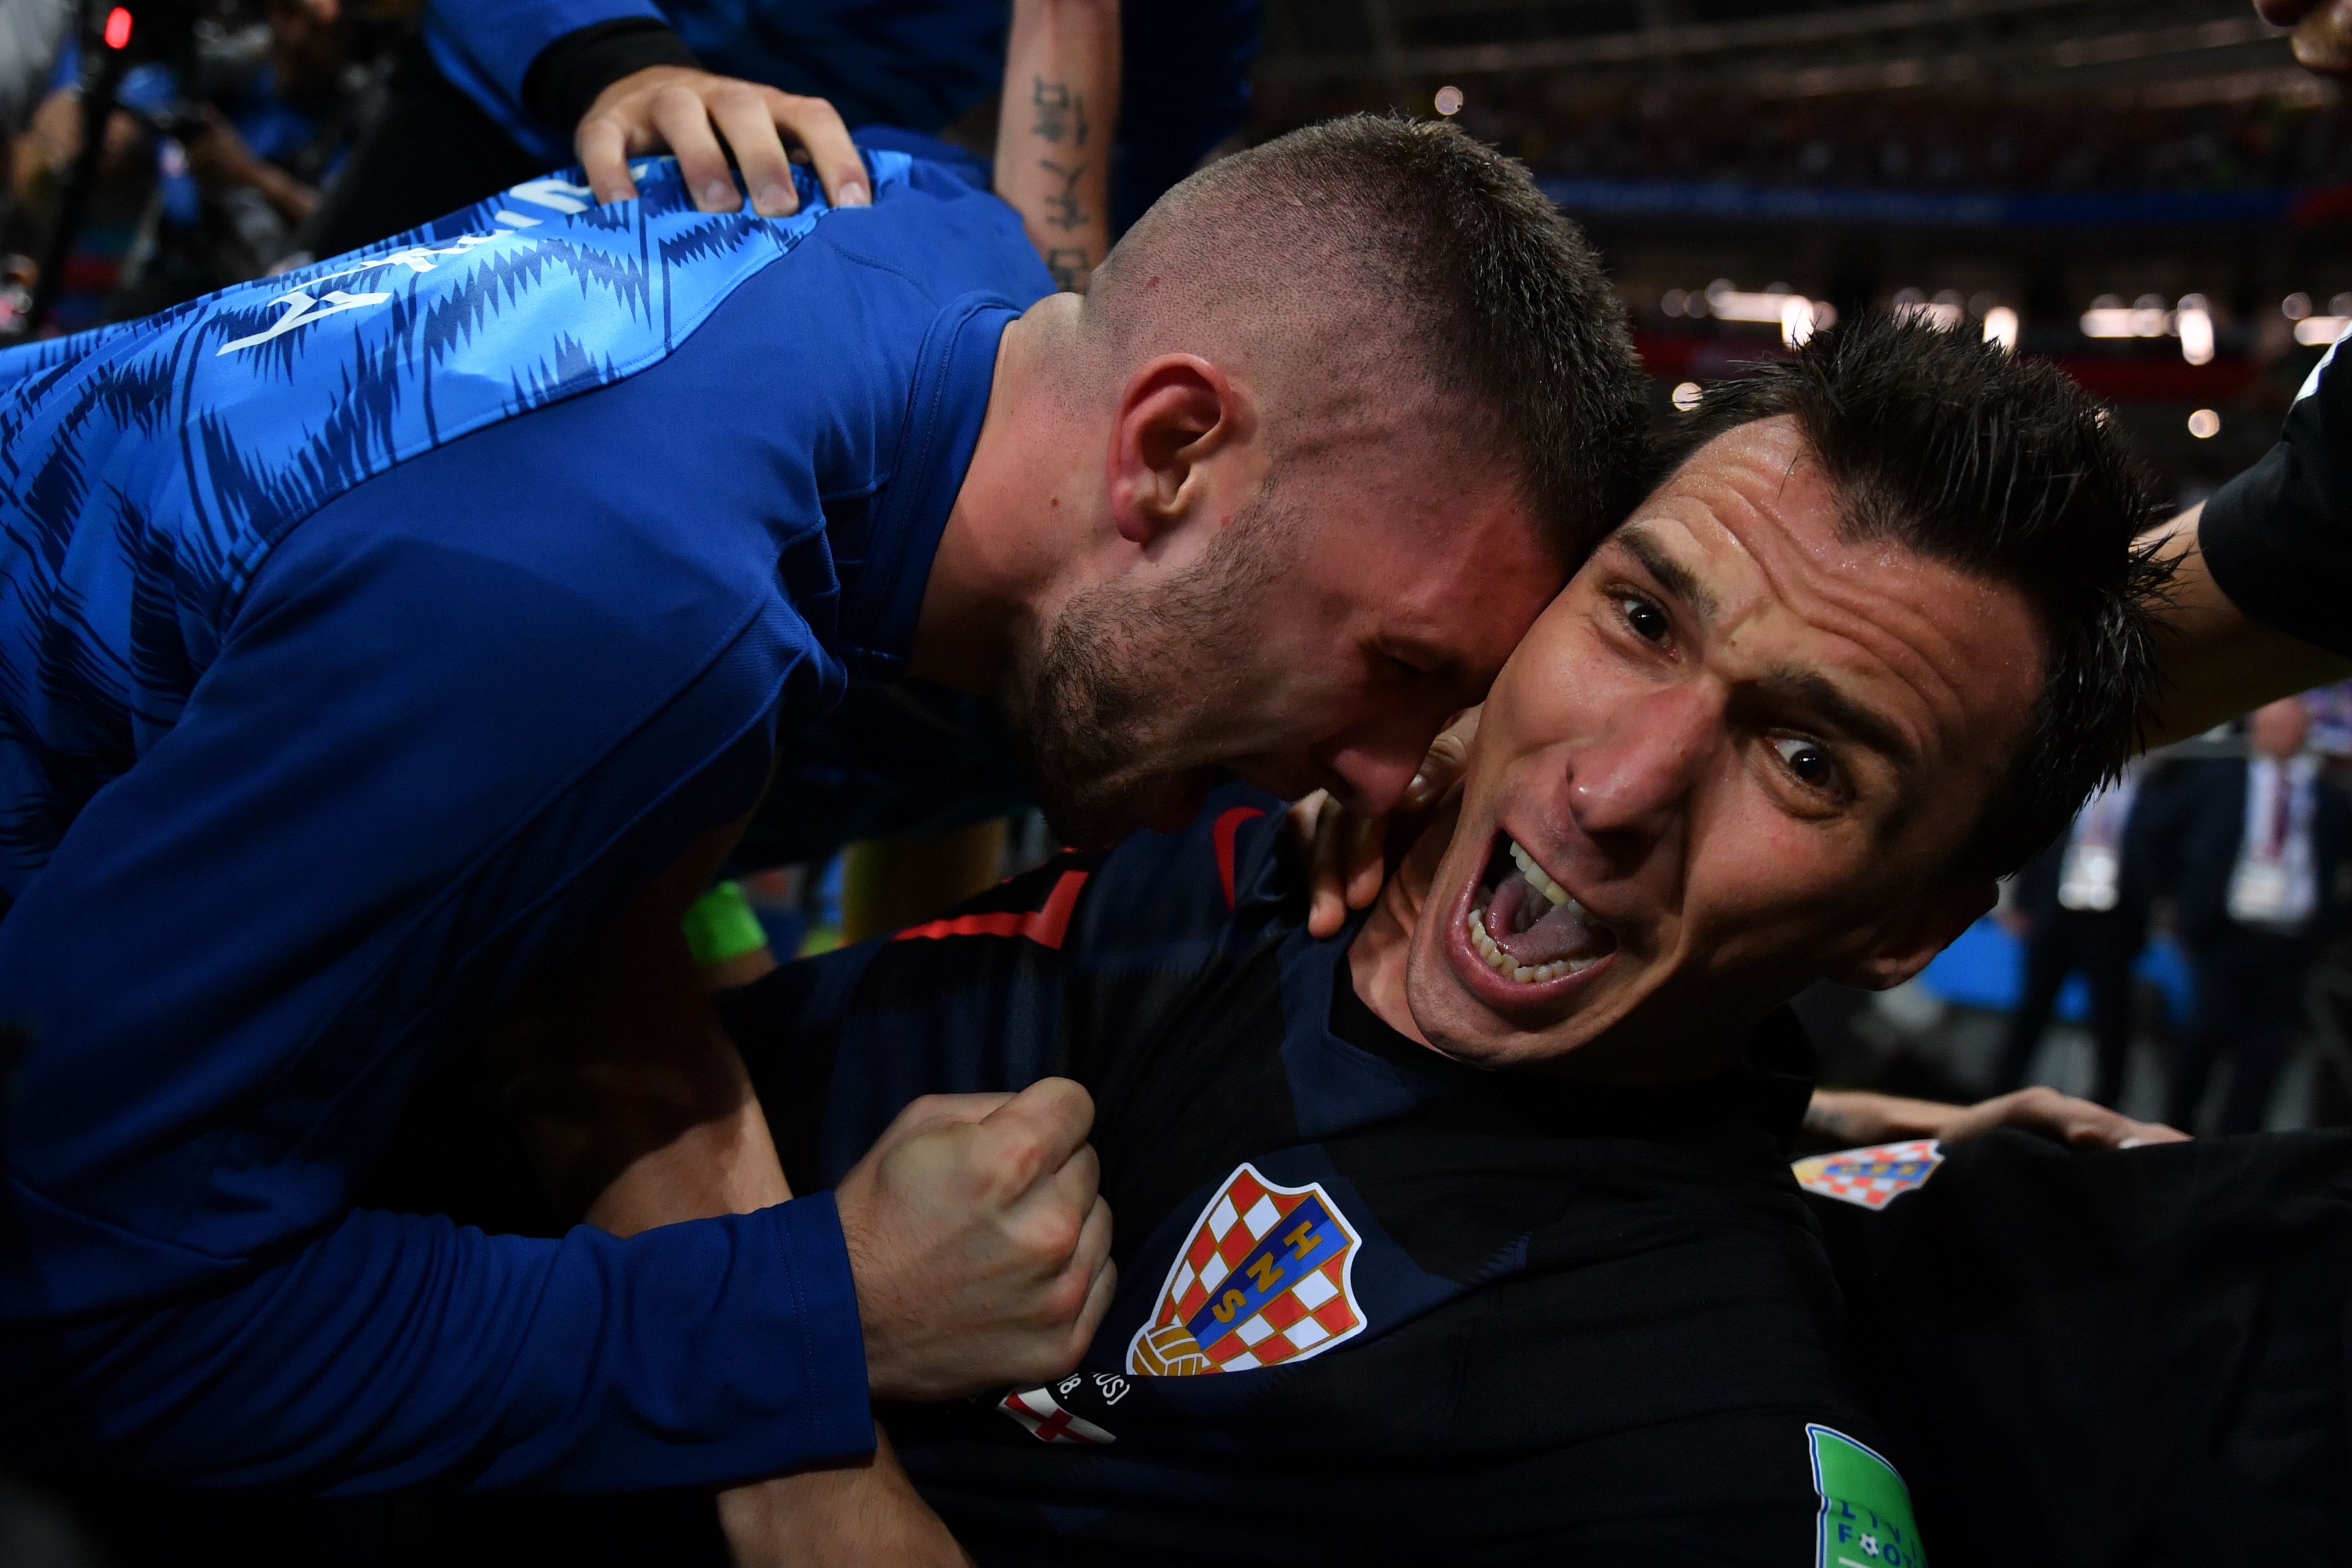 Croatia's forward Mario Mandzukic (R) celebrates with teammates after scoring his team's second goal during the semi-final game on July 11, 2018. (Yuri Cortez&mdash;AFP/Getty Images)